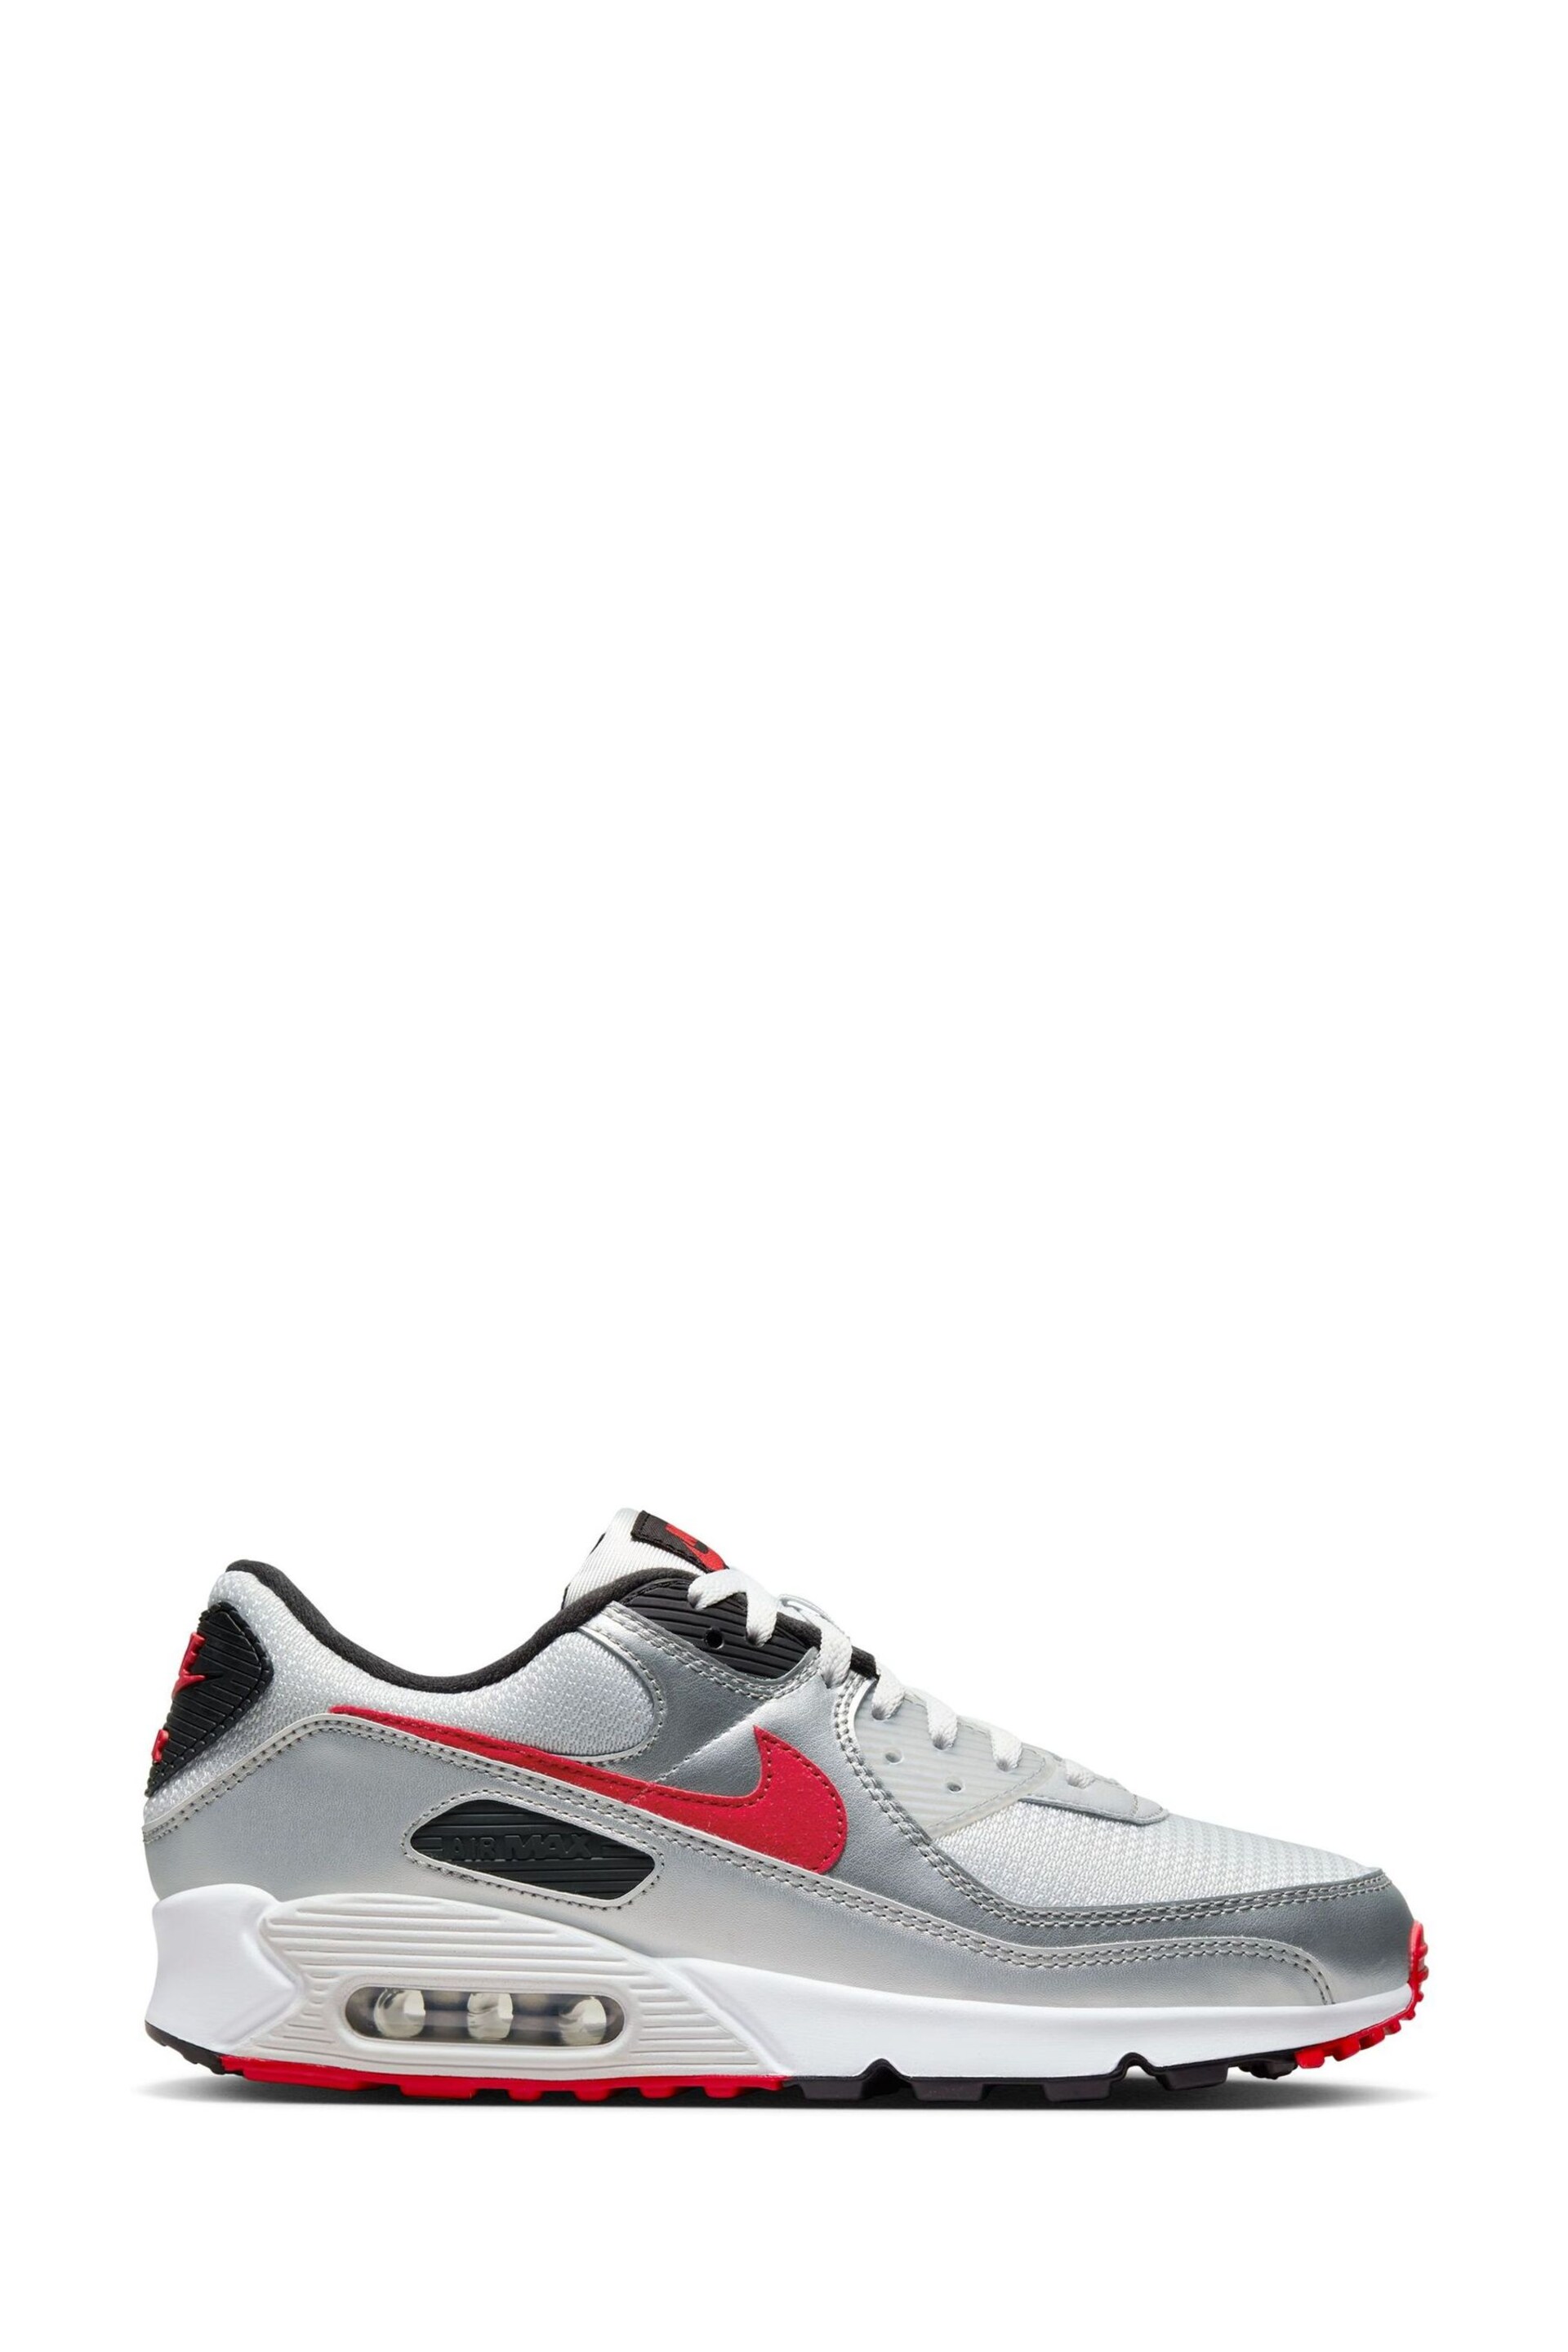 Nike Grey/Red Air Max 90 Trainers - Image 1 of 9